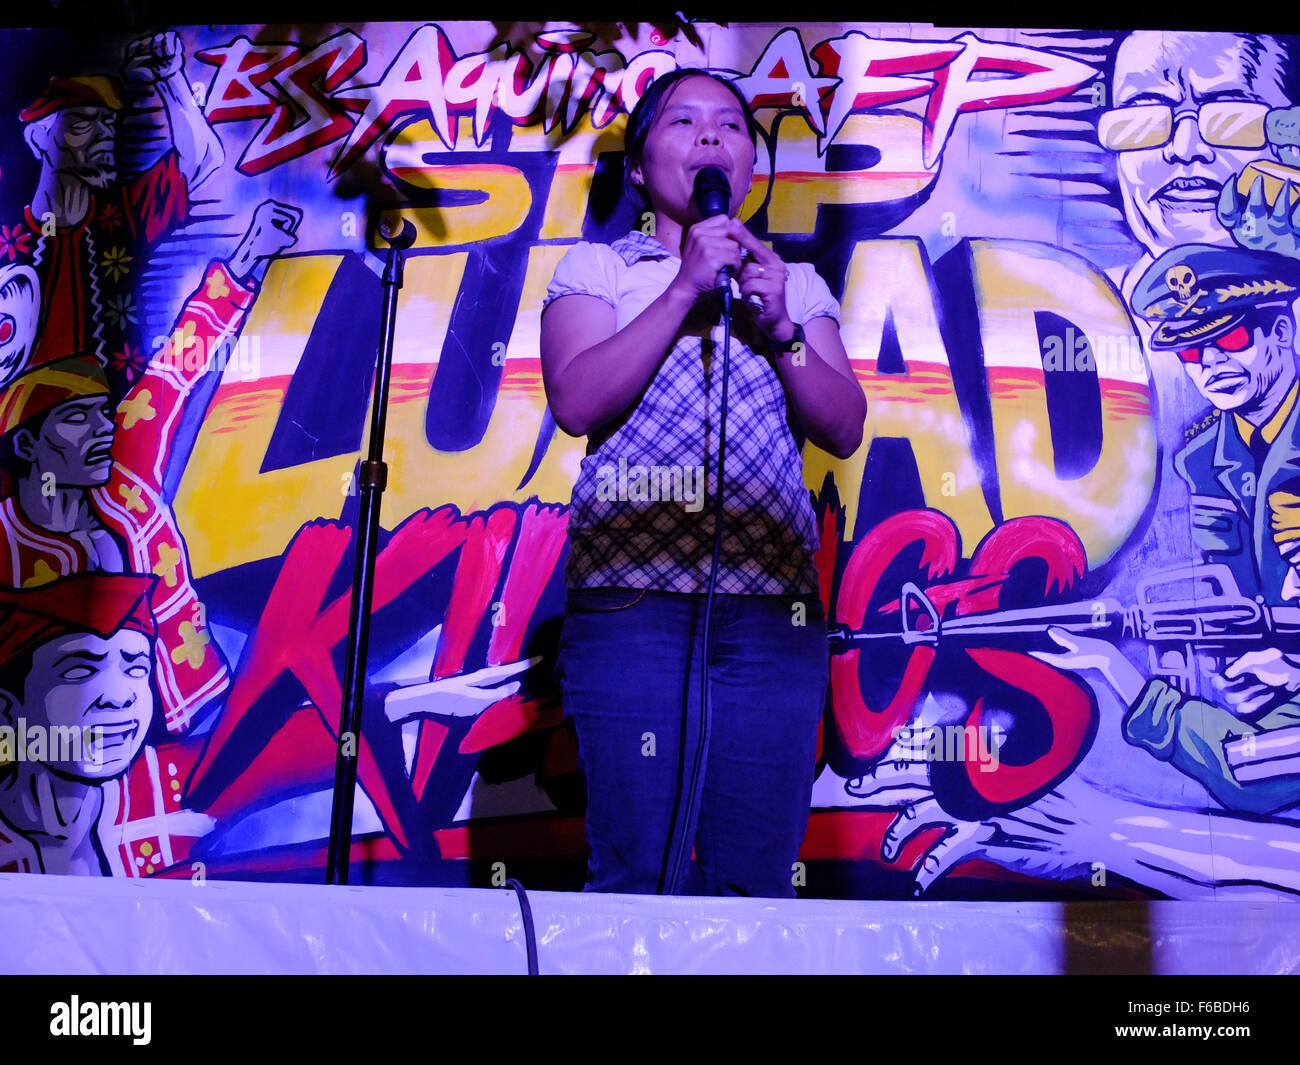 A daughter of a slain Lumad, tearfully narrates their ordeal during the Solidarity Cultural Night. The Lumad peoples are a group of indigenous people of the southern Philippines. It is a Cebuano term meaning 'native' or 'indigenous'. The term is short for Katawhang Lumad (literally 'indigenous peoples'), the autonym officially adopted by the delegates of the Lumad Mindanao Peoples Federation (LMPF) founding assembly on 26 June 1986 at the Guadalupe Formation Center, Balindog, Kidapawan, Cotabato, Philippines. It is the self-ascription and collective identity of the indigenous peoples of Mindan Stock Photo